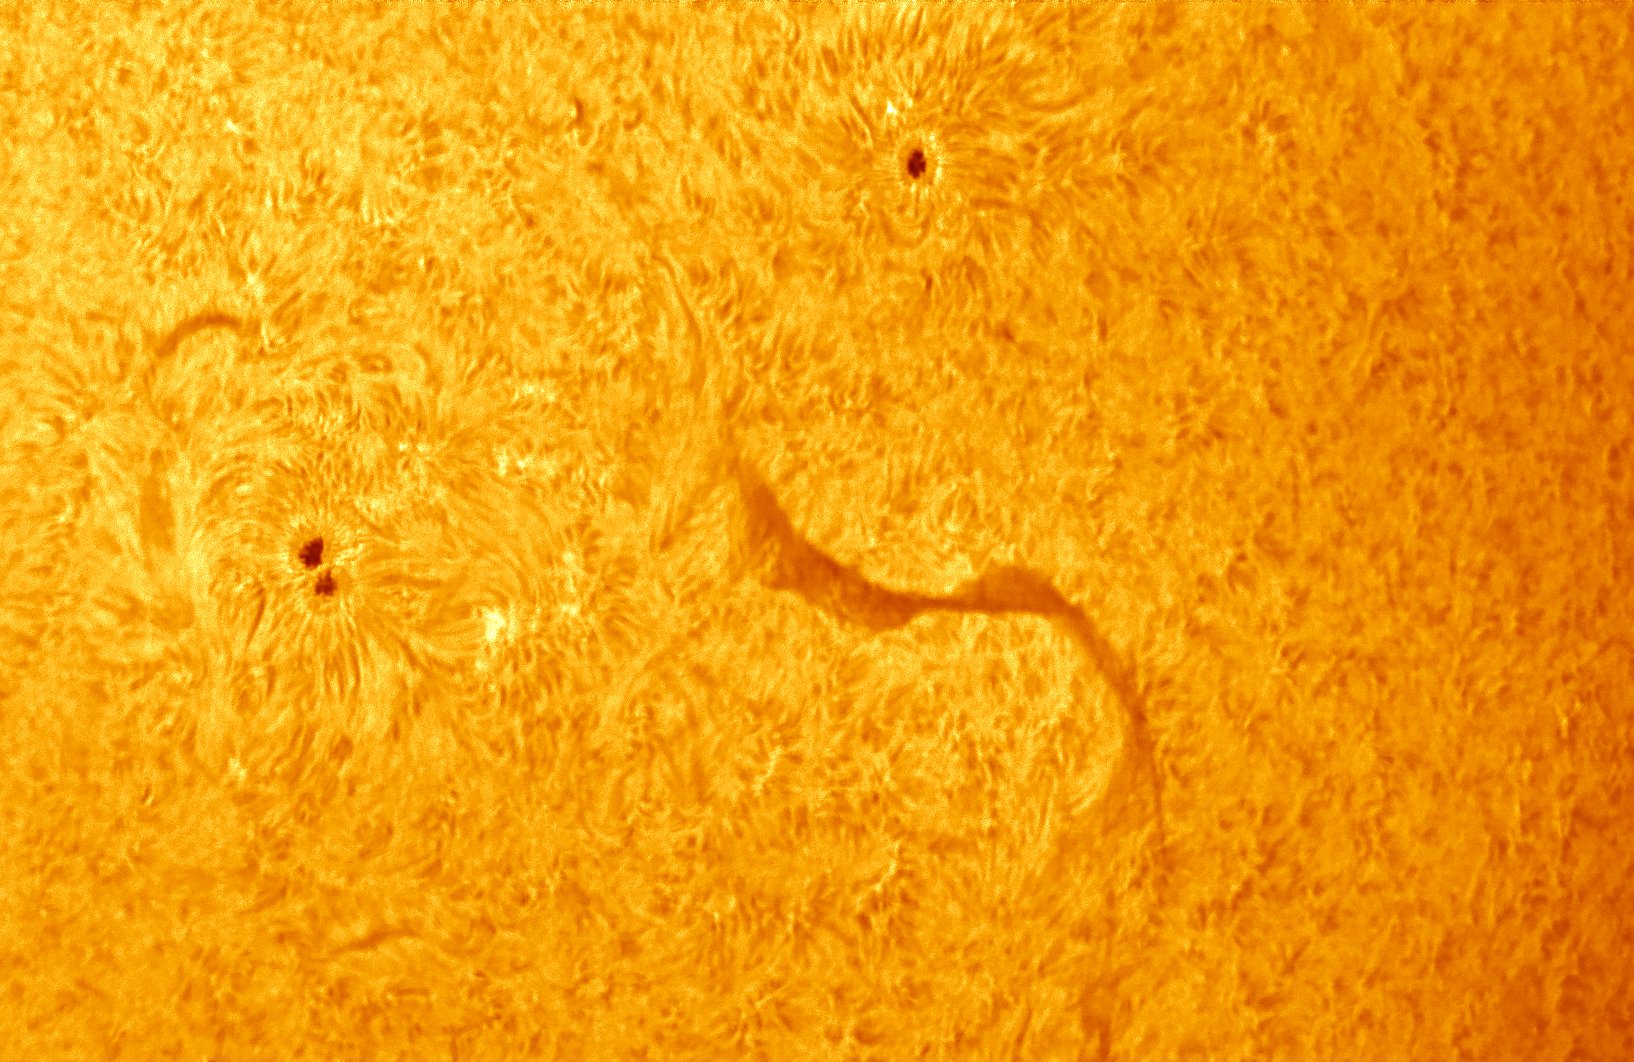 Sunspots 3023 and 3024 on May 31, 2022